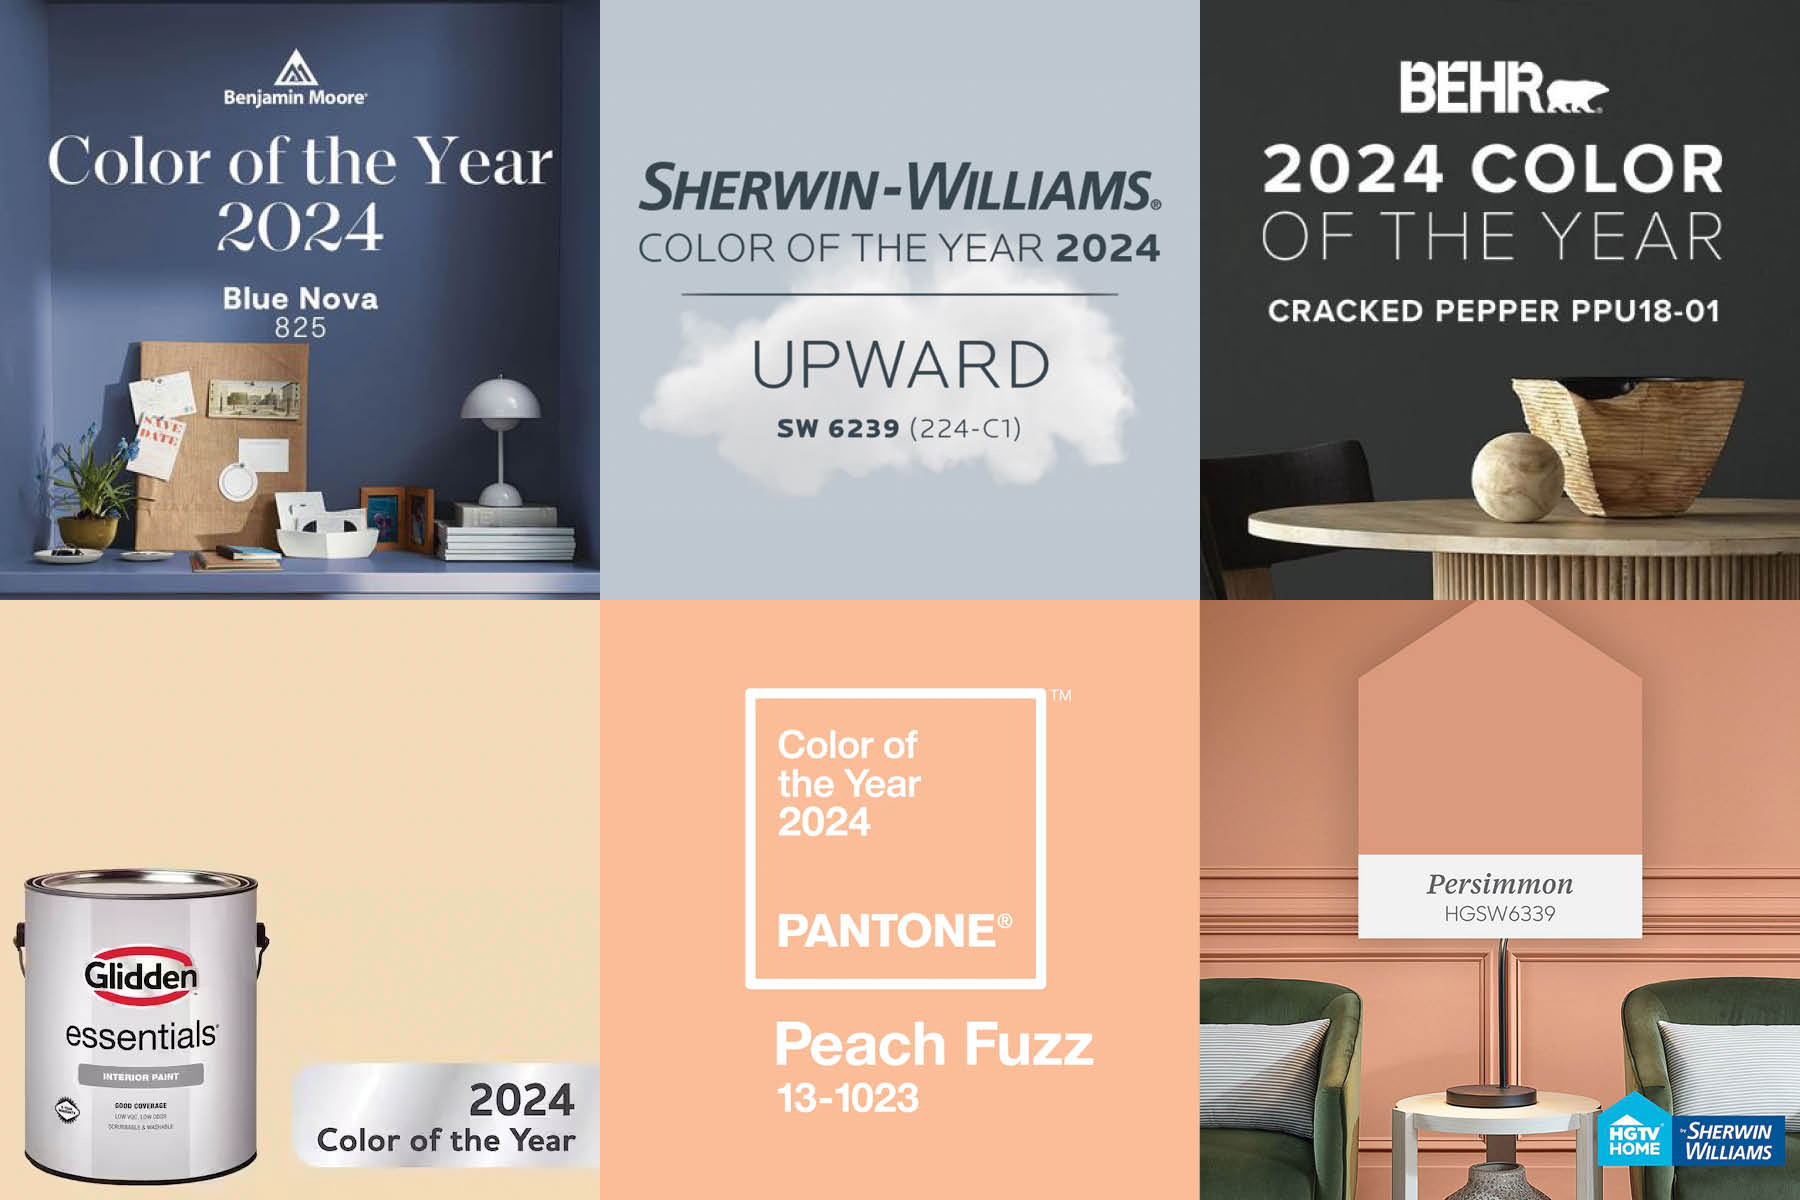 HGTV Home by Sherwin-Williams Announces 2024 Color Collection of